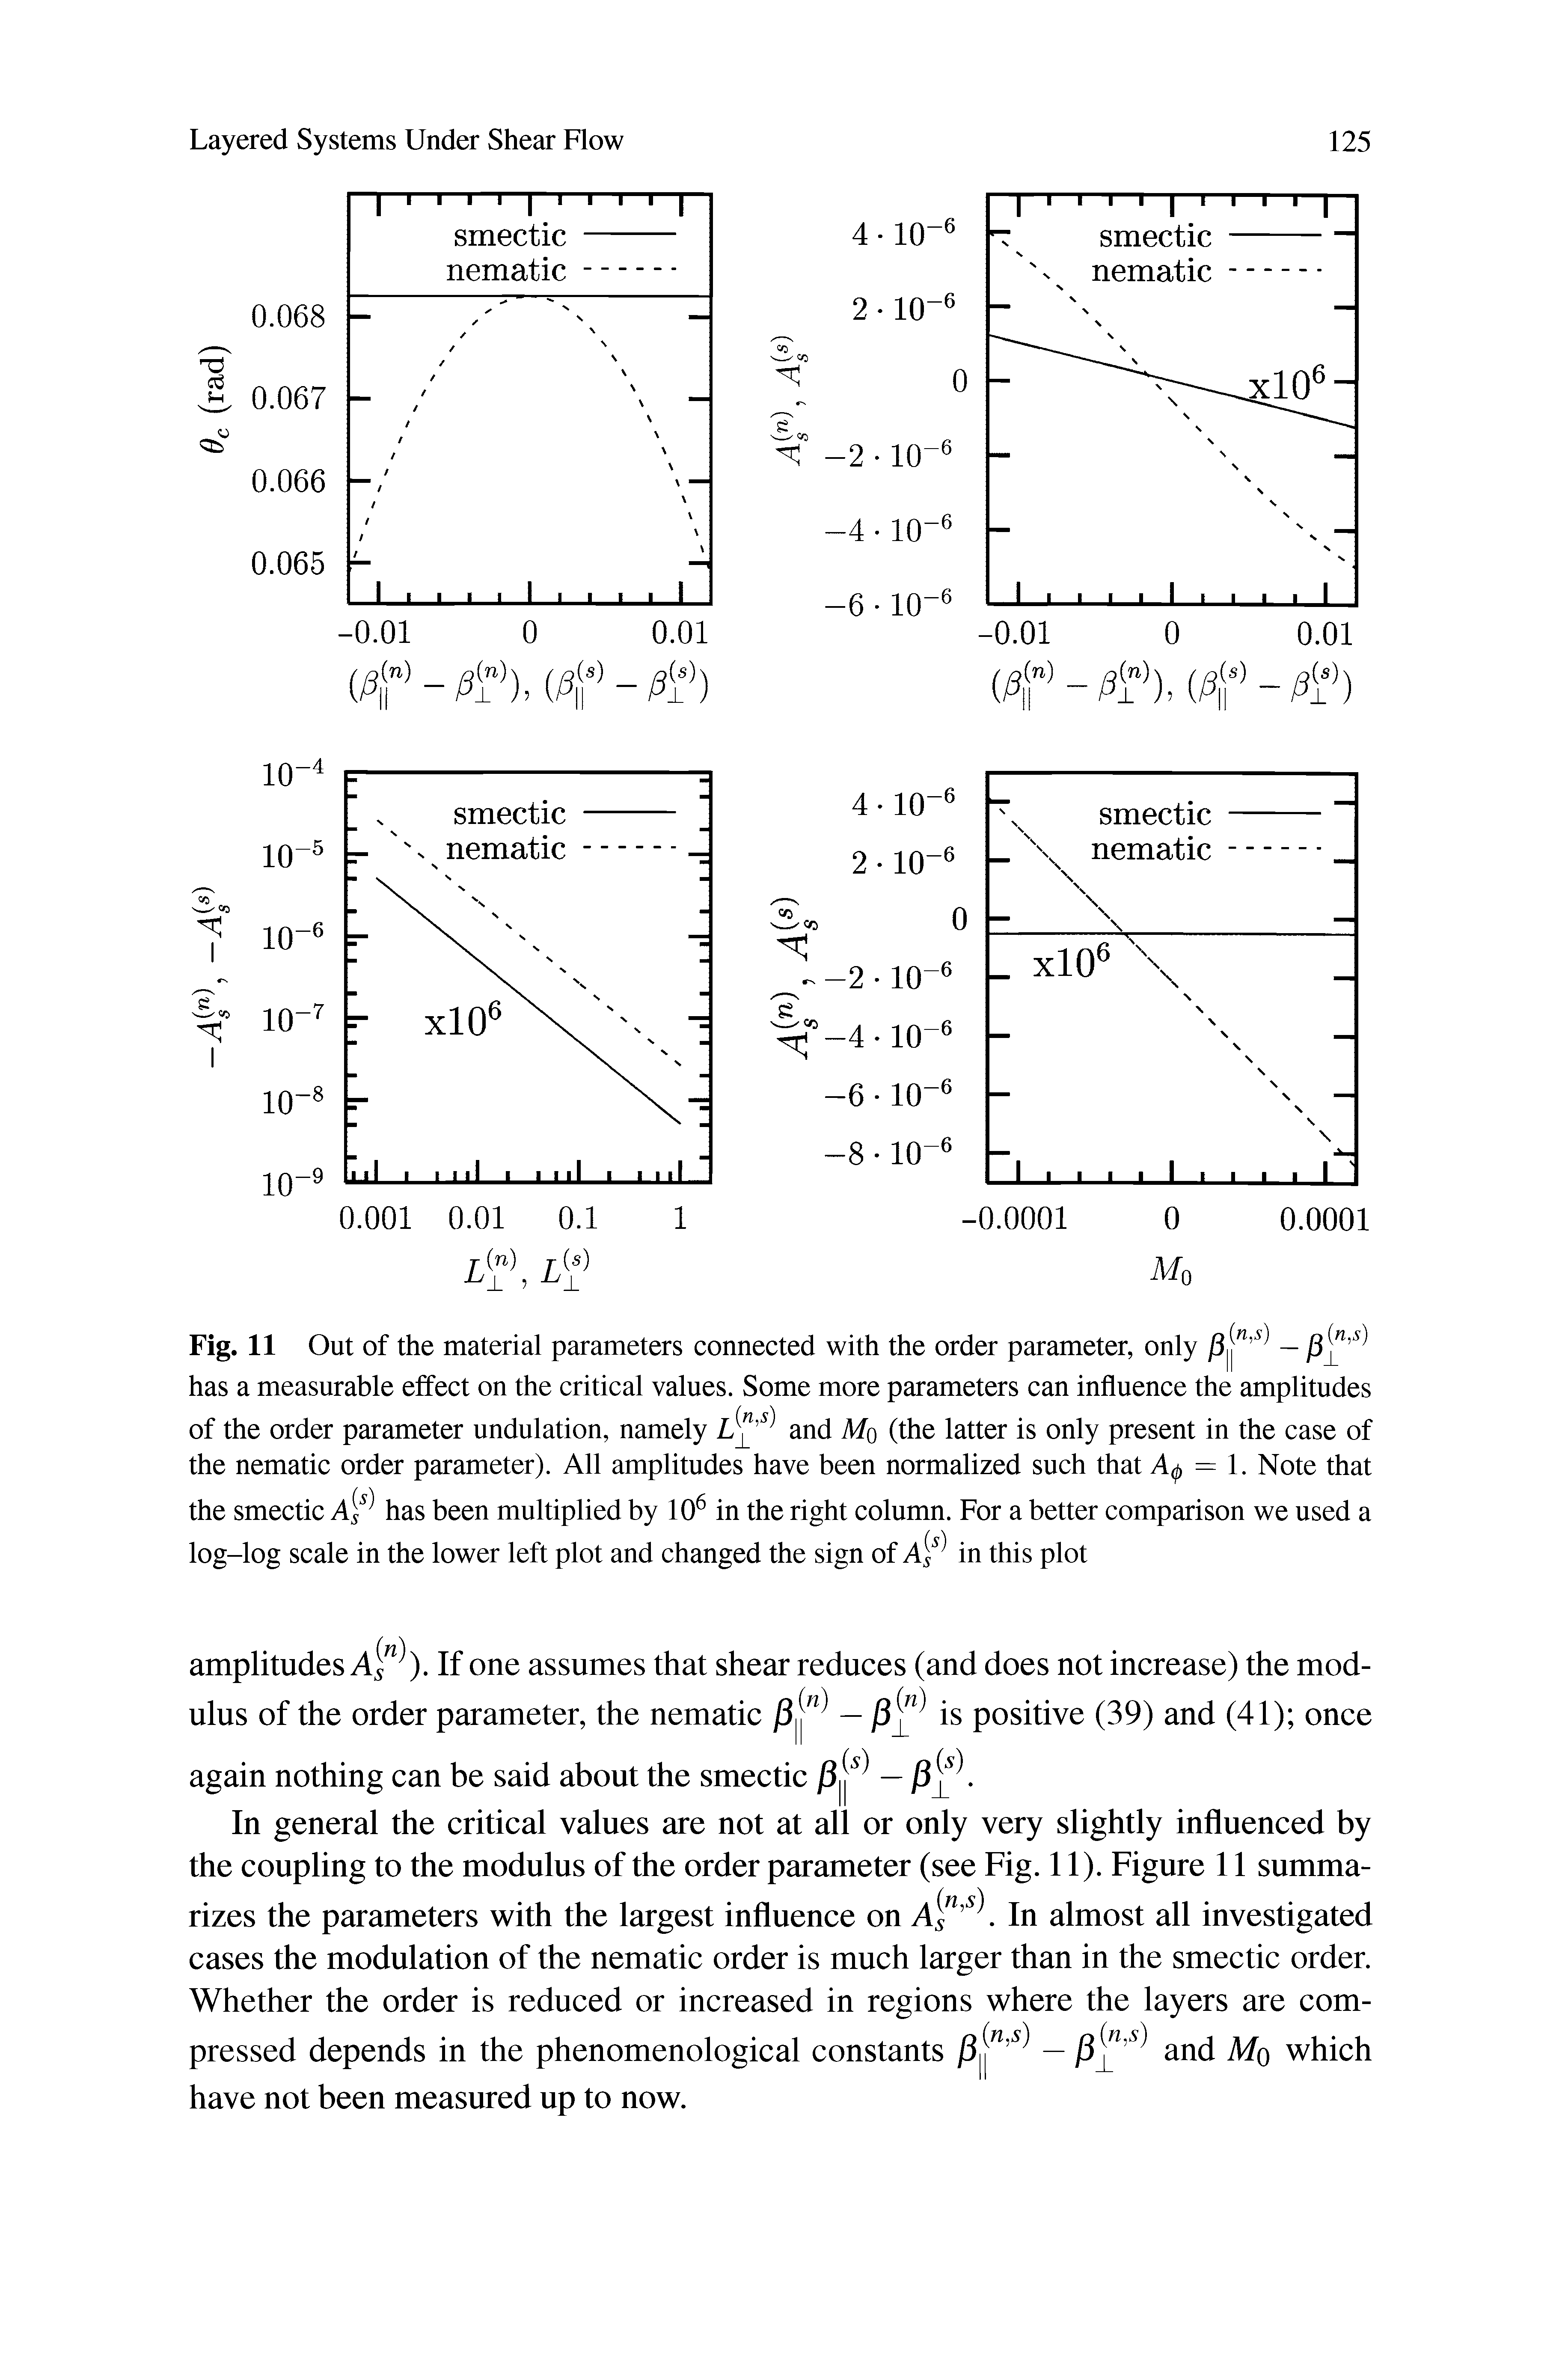 Fig. 11 Out of the material parameters connected with the order parameter, only /3 jn — has a measurable effect on the critical values. Some more parameters can influence the amplitudes of the order parameter undulation, namely L and Mo (the latter is only present in the case of the nematic order parameter). All amplitudes have been normalized such that = 1. Note that...